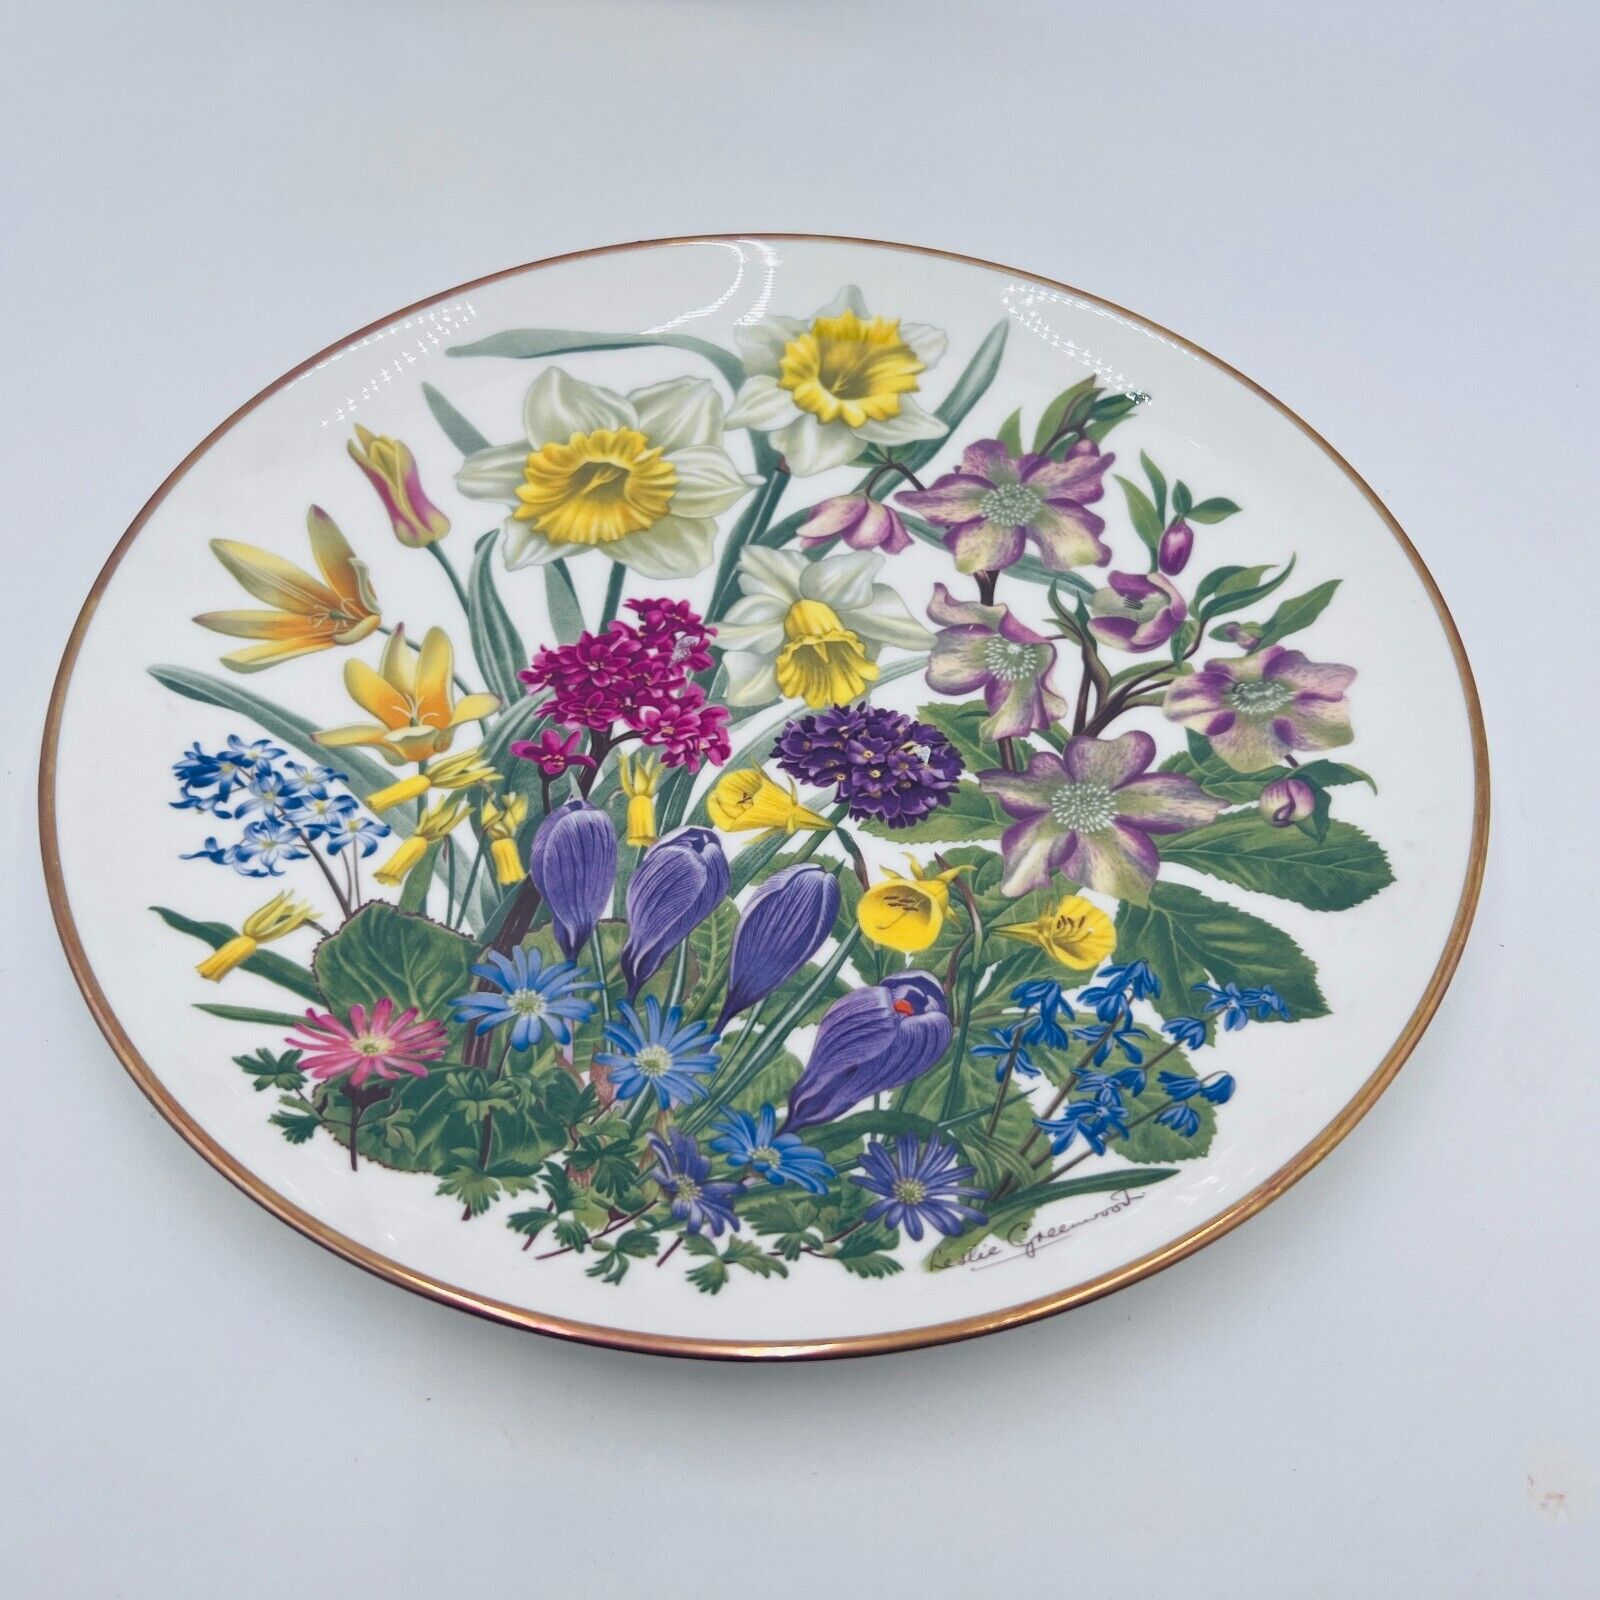 Franklin Mint Flowers of the Year Plate Wedgwood England March 1977 Porcelain